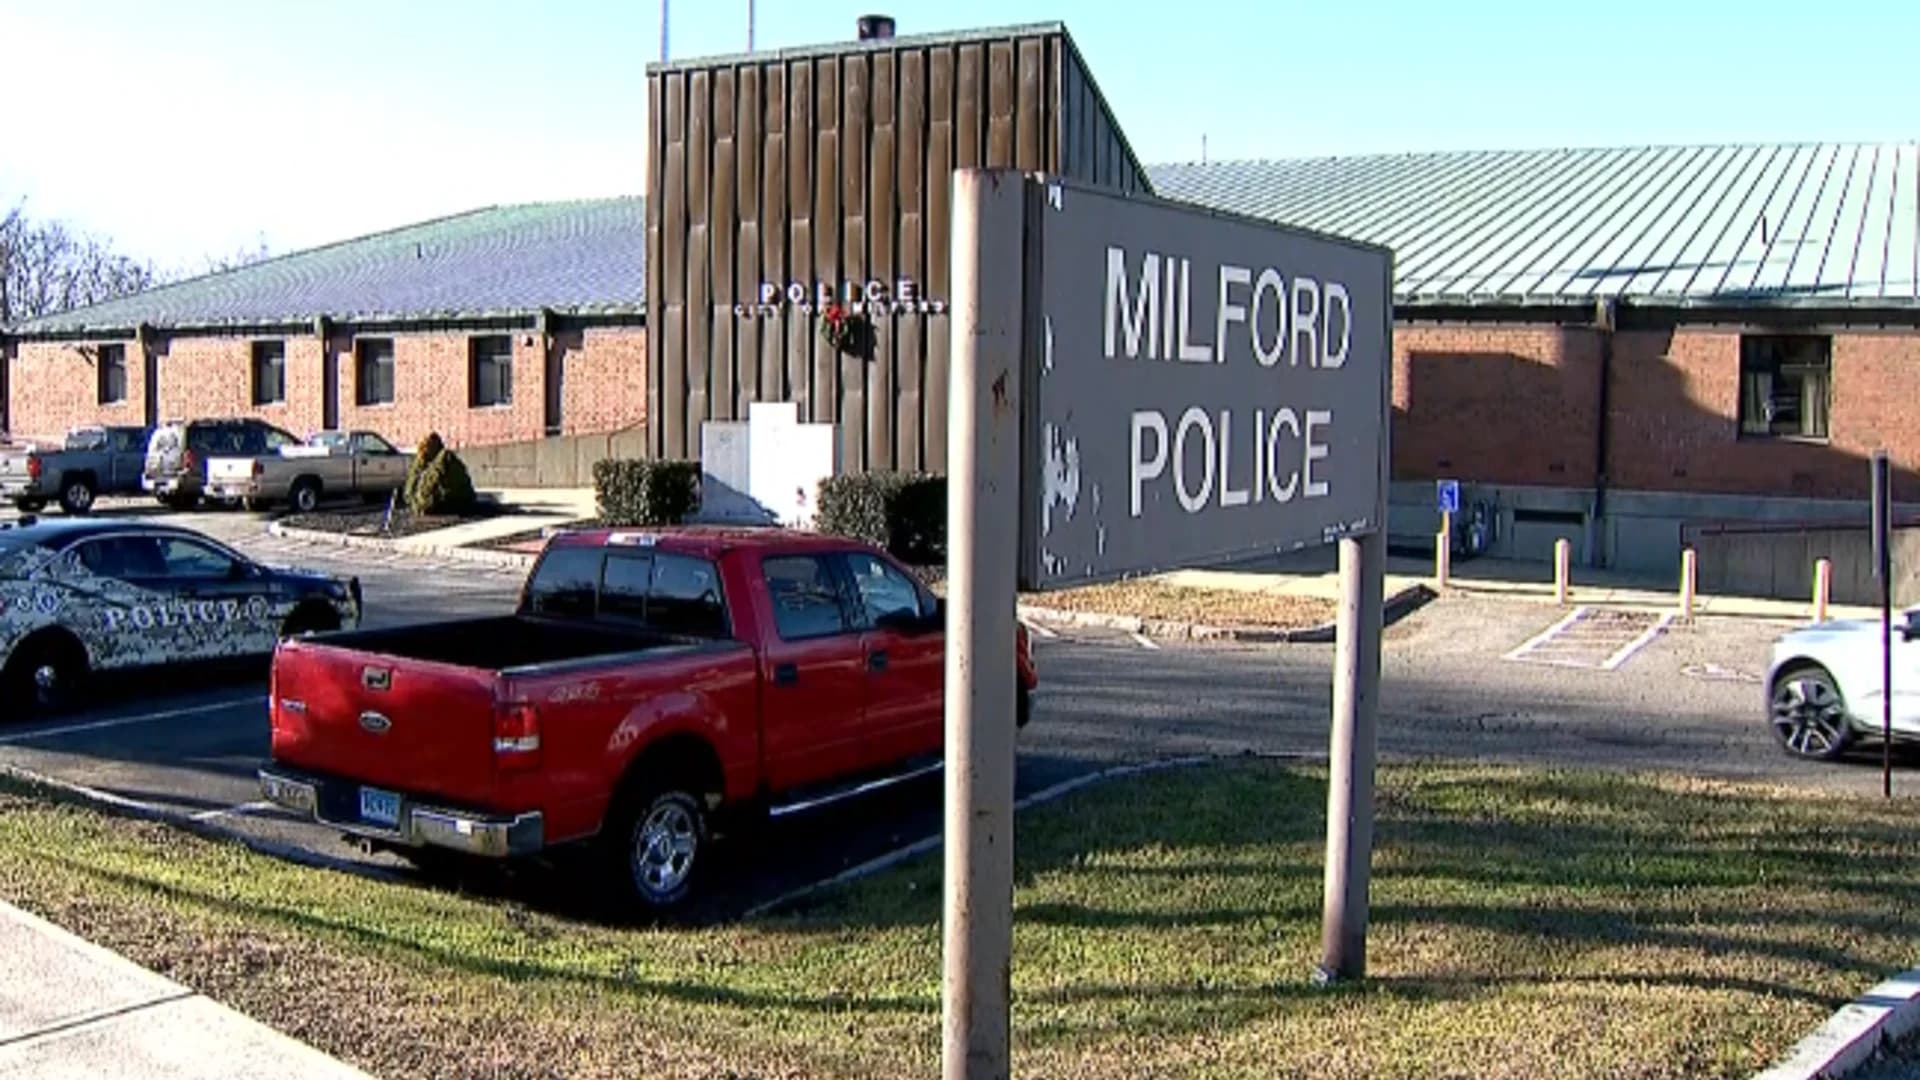 'Suspicious' package turned into Milford police prompts headquarters shutdown